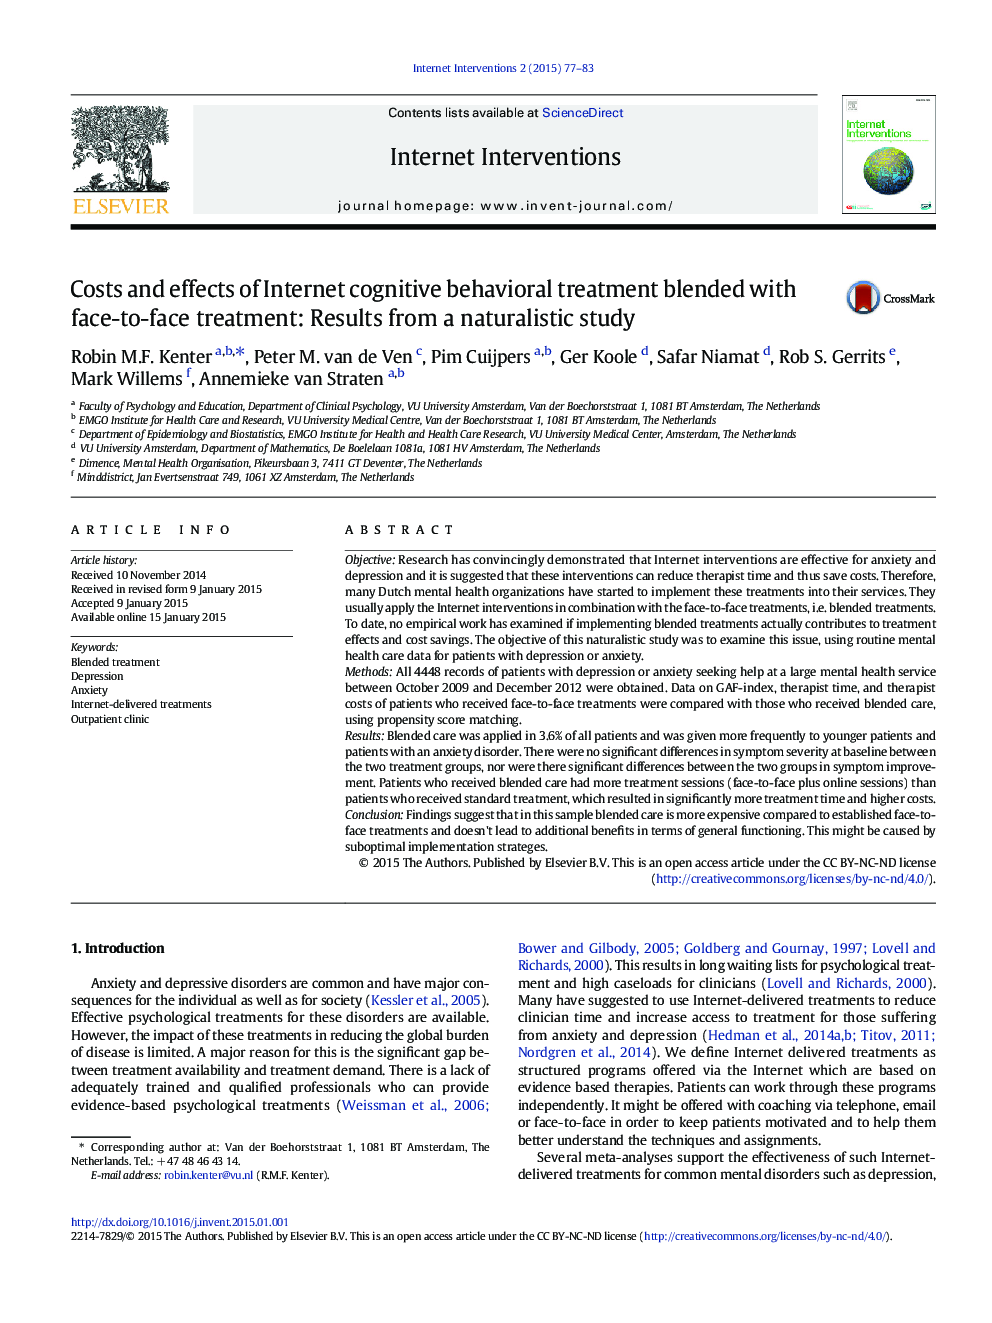 Costs and effects of Internet cognitive behavioral treatment blended with face-to-face treatment: Results from a naturalistic study